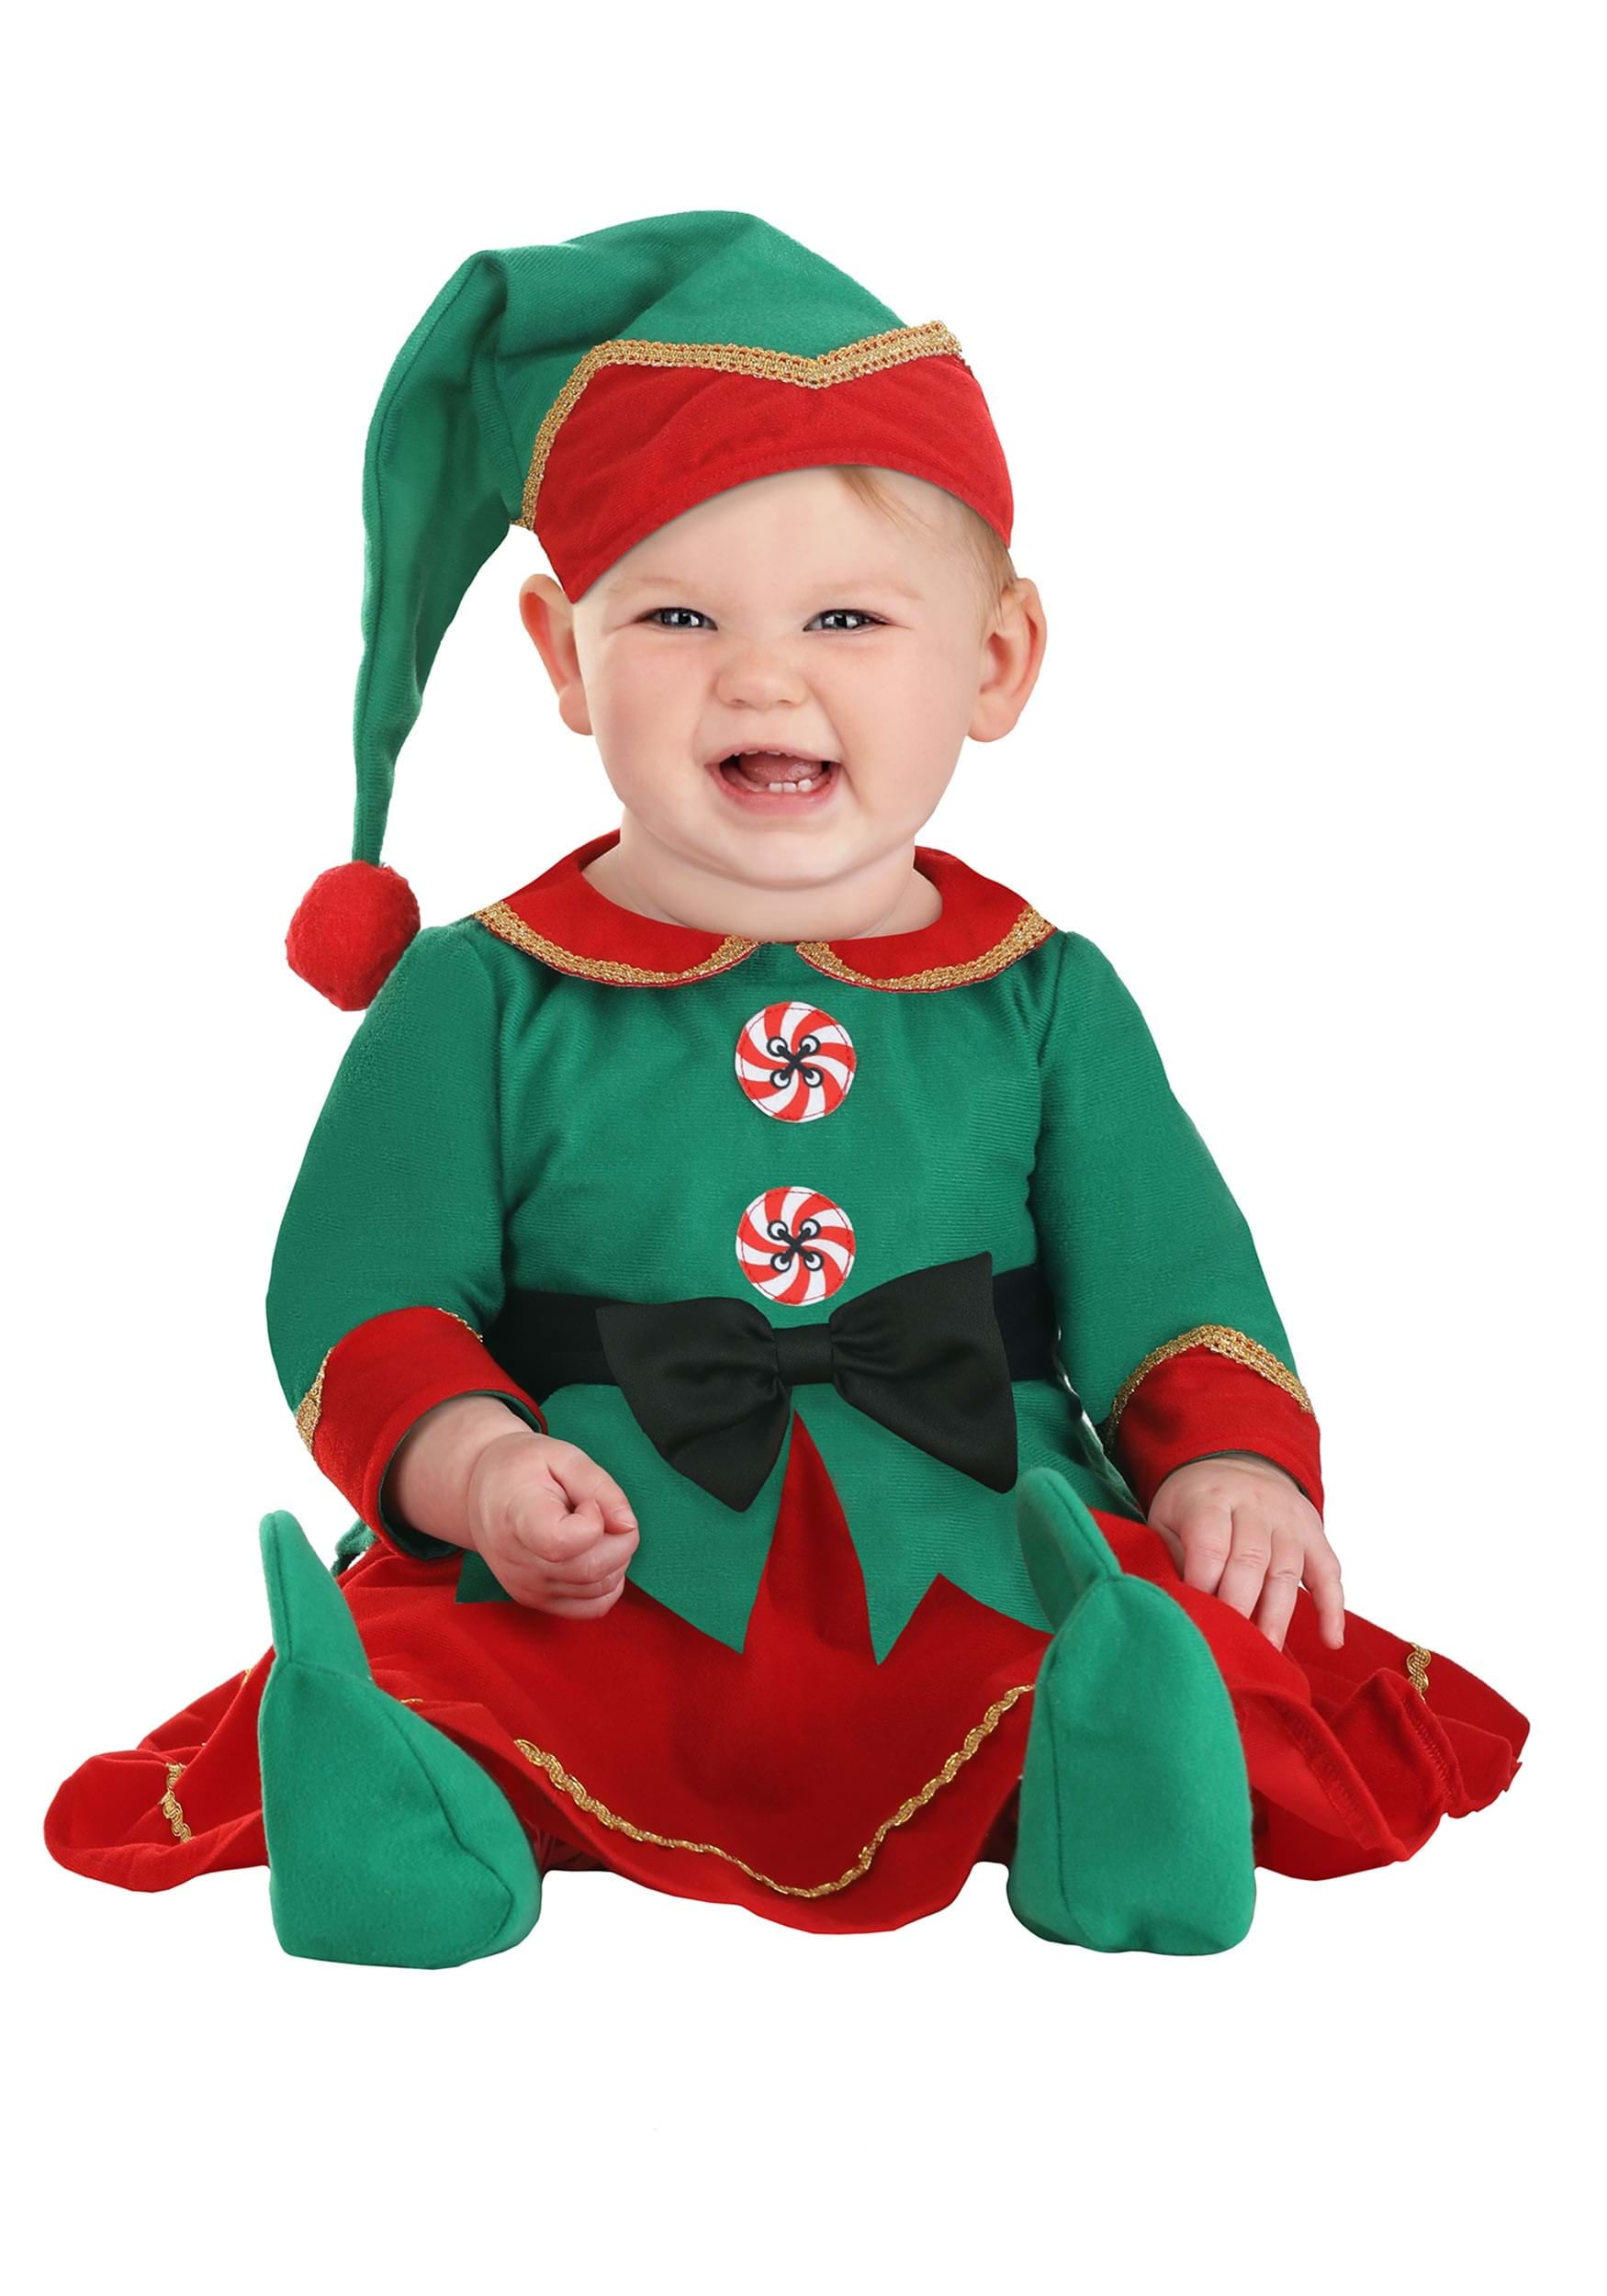 ELF SHOES Christmas Costume Elves Latex Dress Up Party Xmas St Patricks Day Boot 